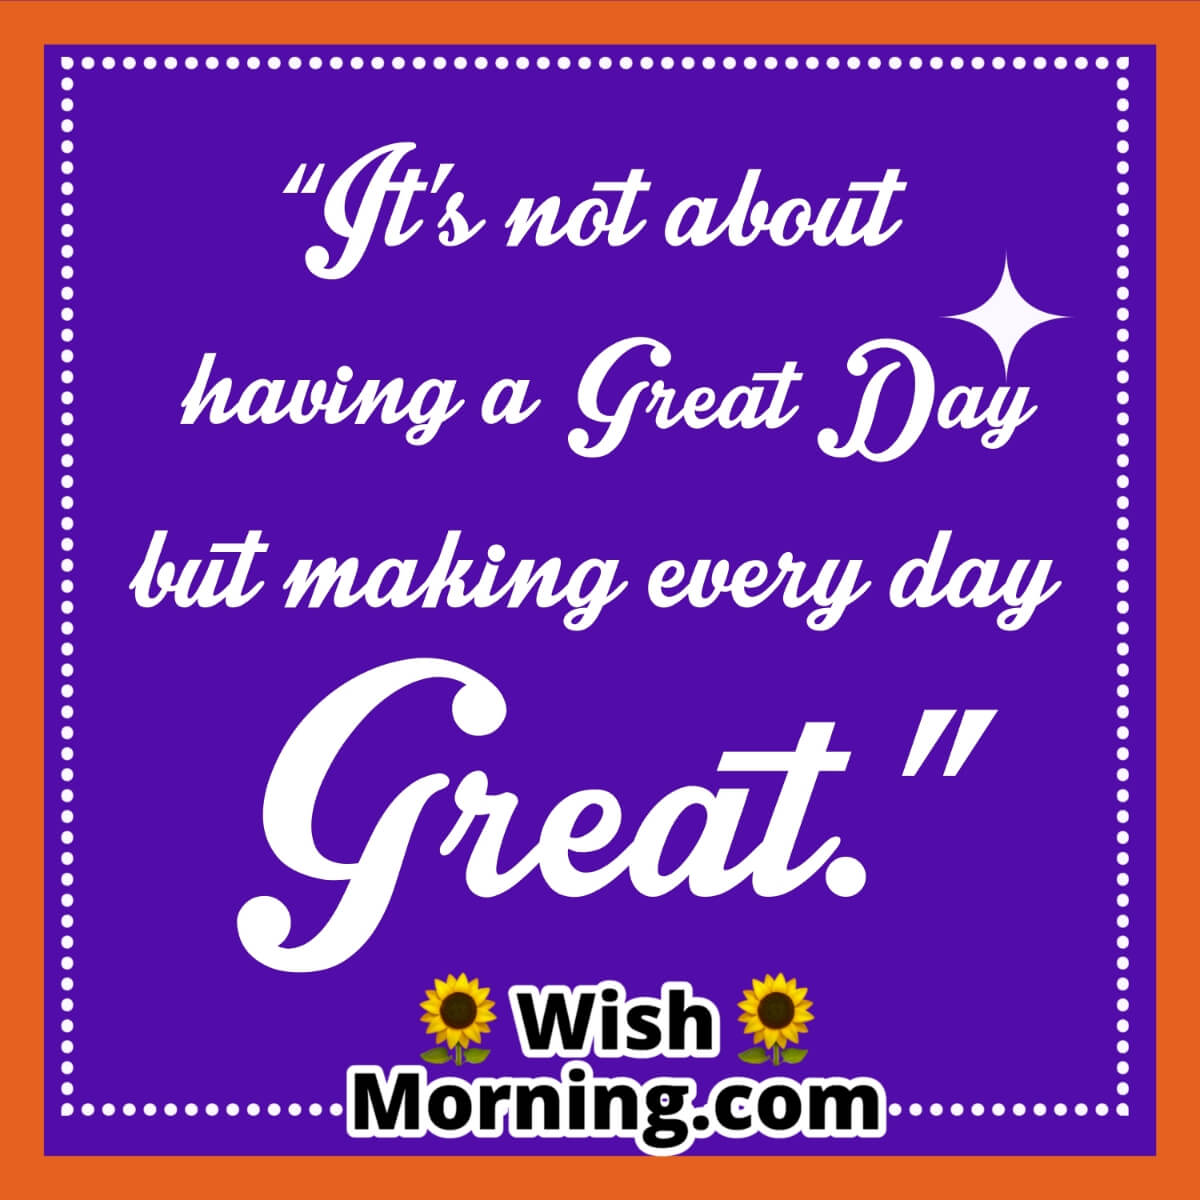 Make Every Day Great Day